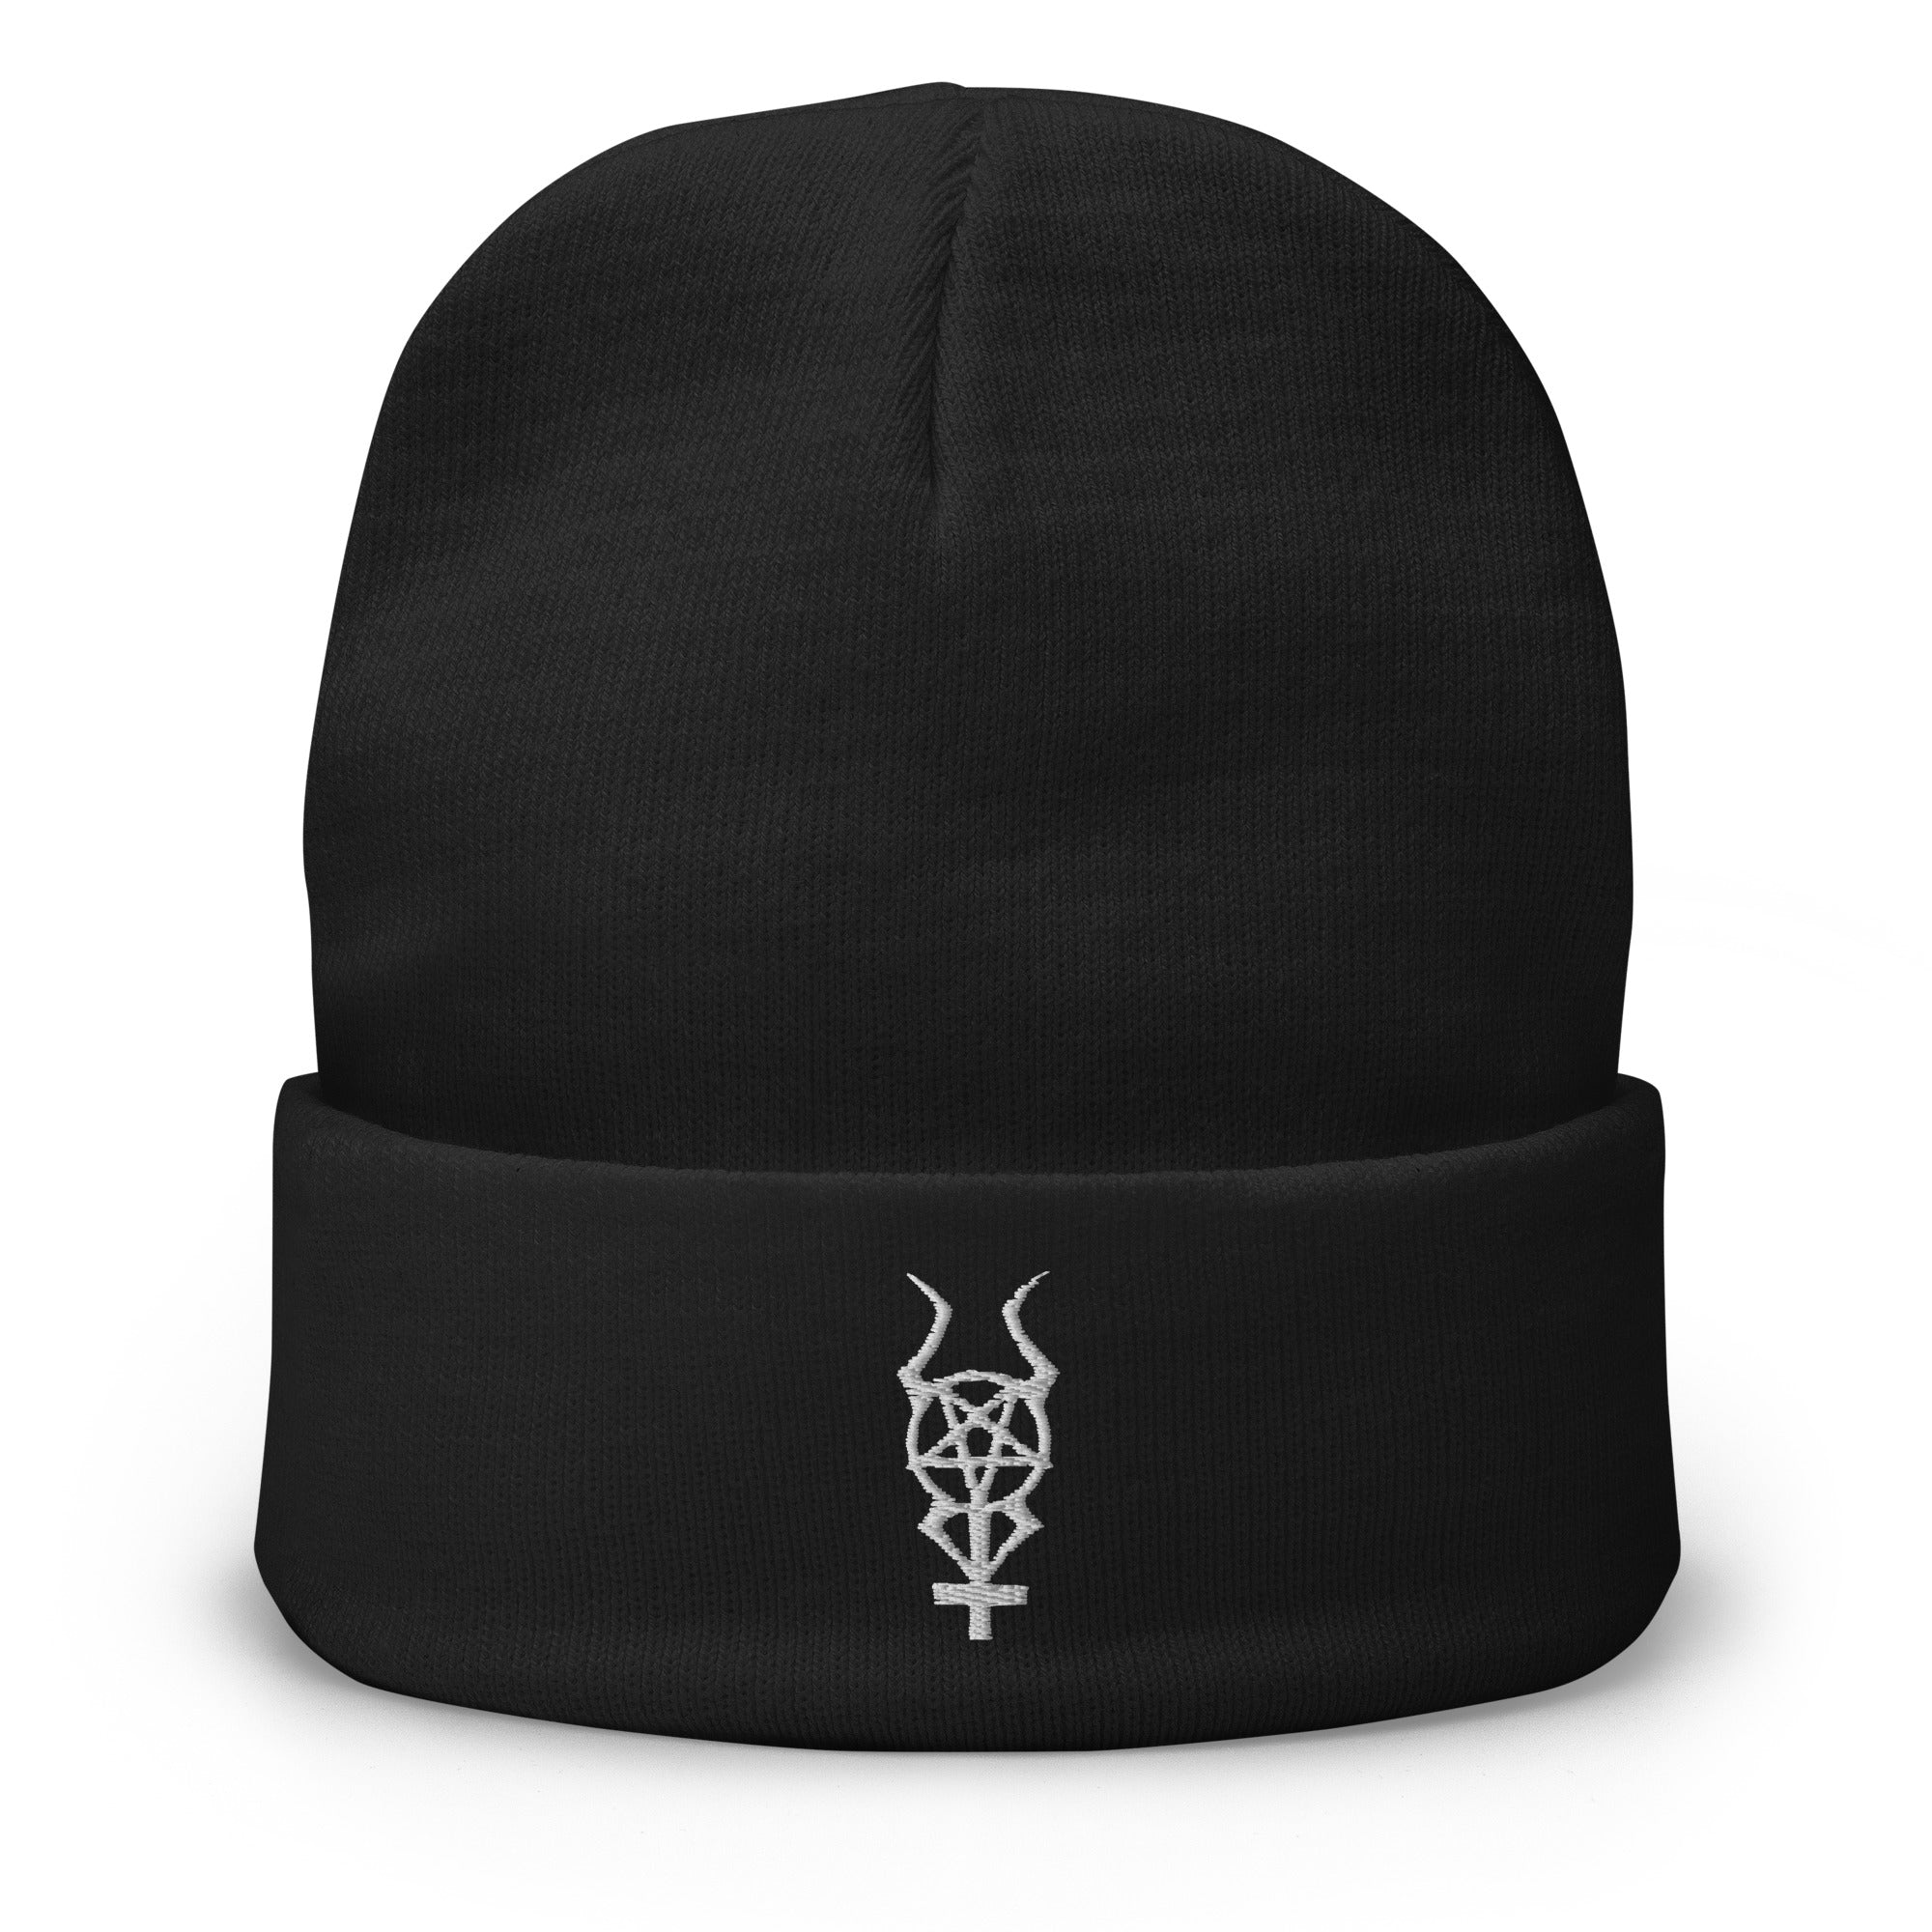 Horned Pentacross Inverted Cross w/ Pentagram and Horns Embroidered Cuff Beanie - Edge of Life Designs